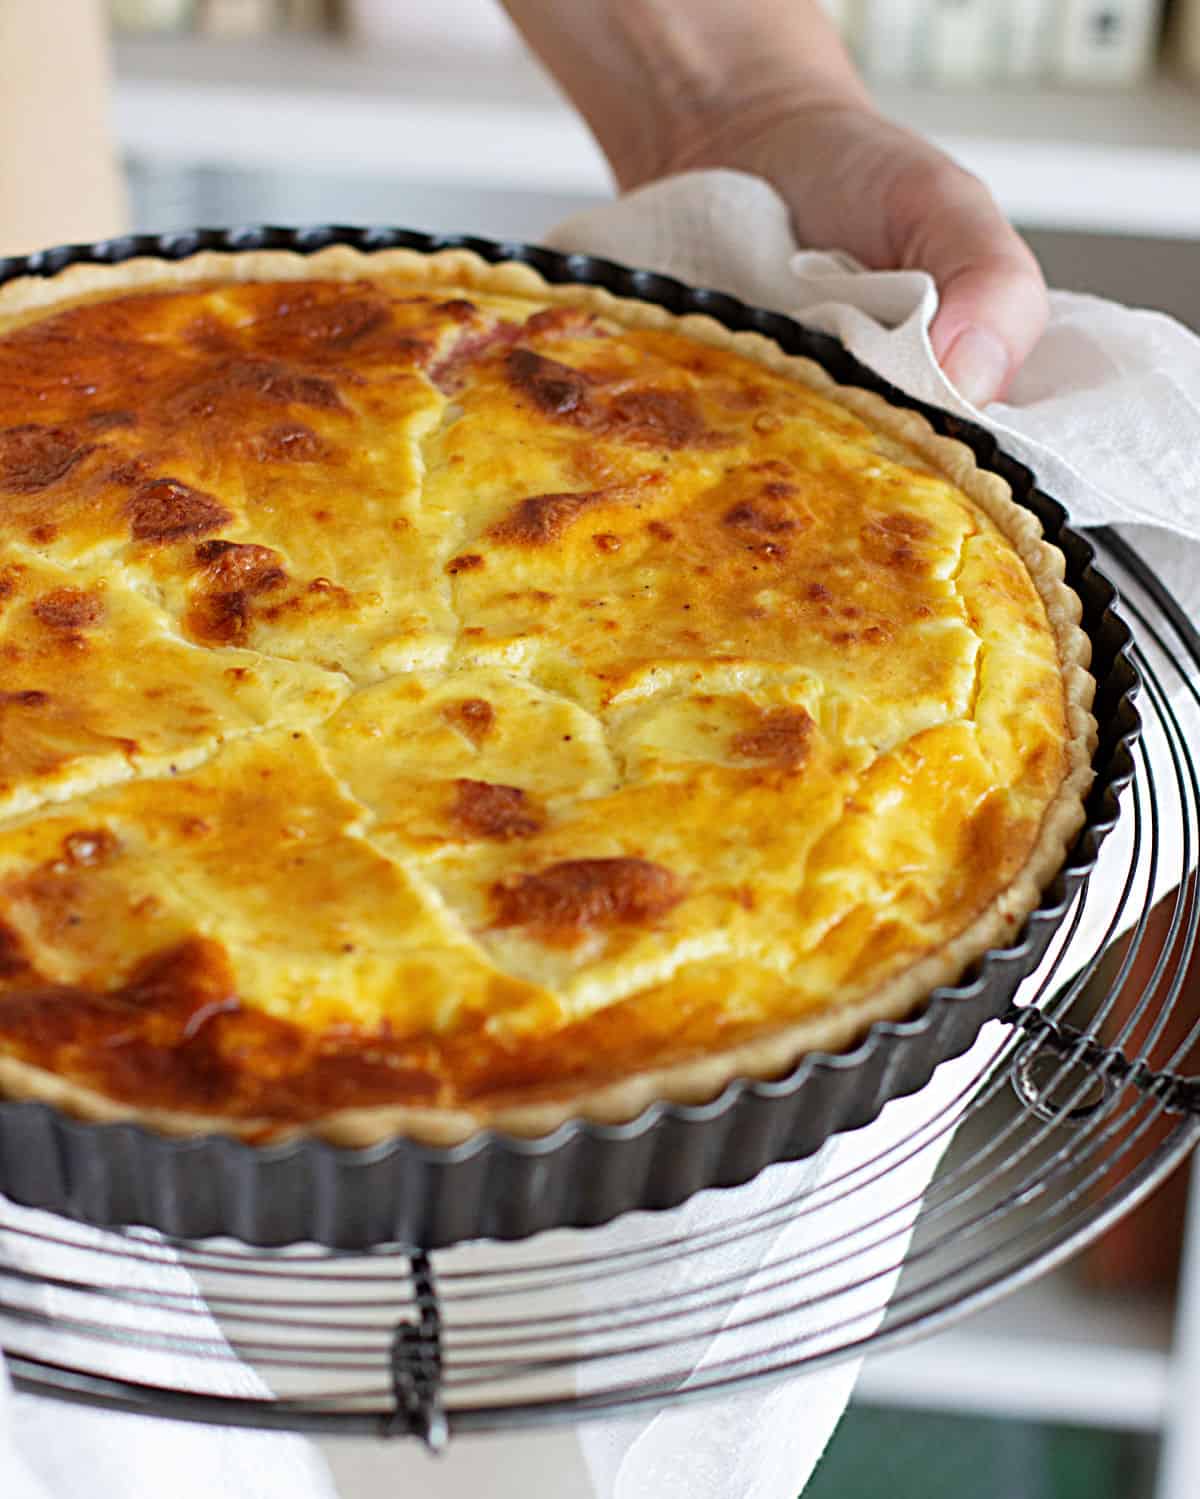 Hands holding whole ham and cheese quiche in metal pan.